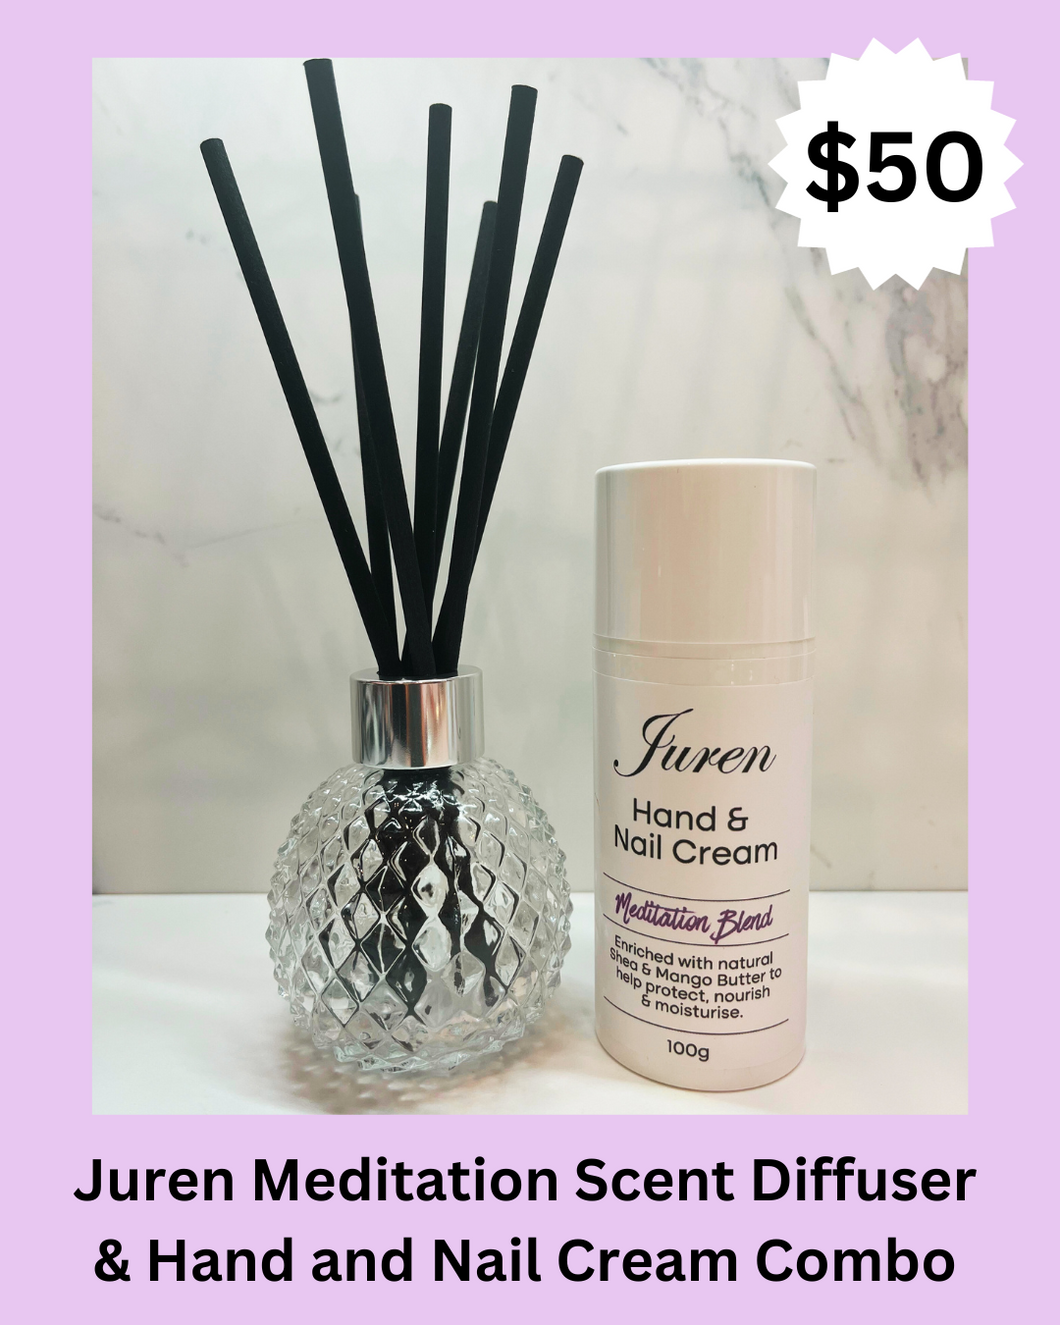 Juren Meditaion Scent Diffuser & Hand and Nail Cream